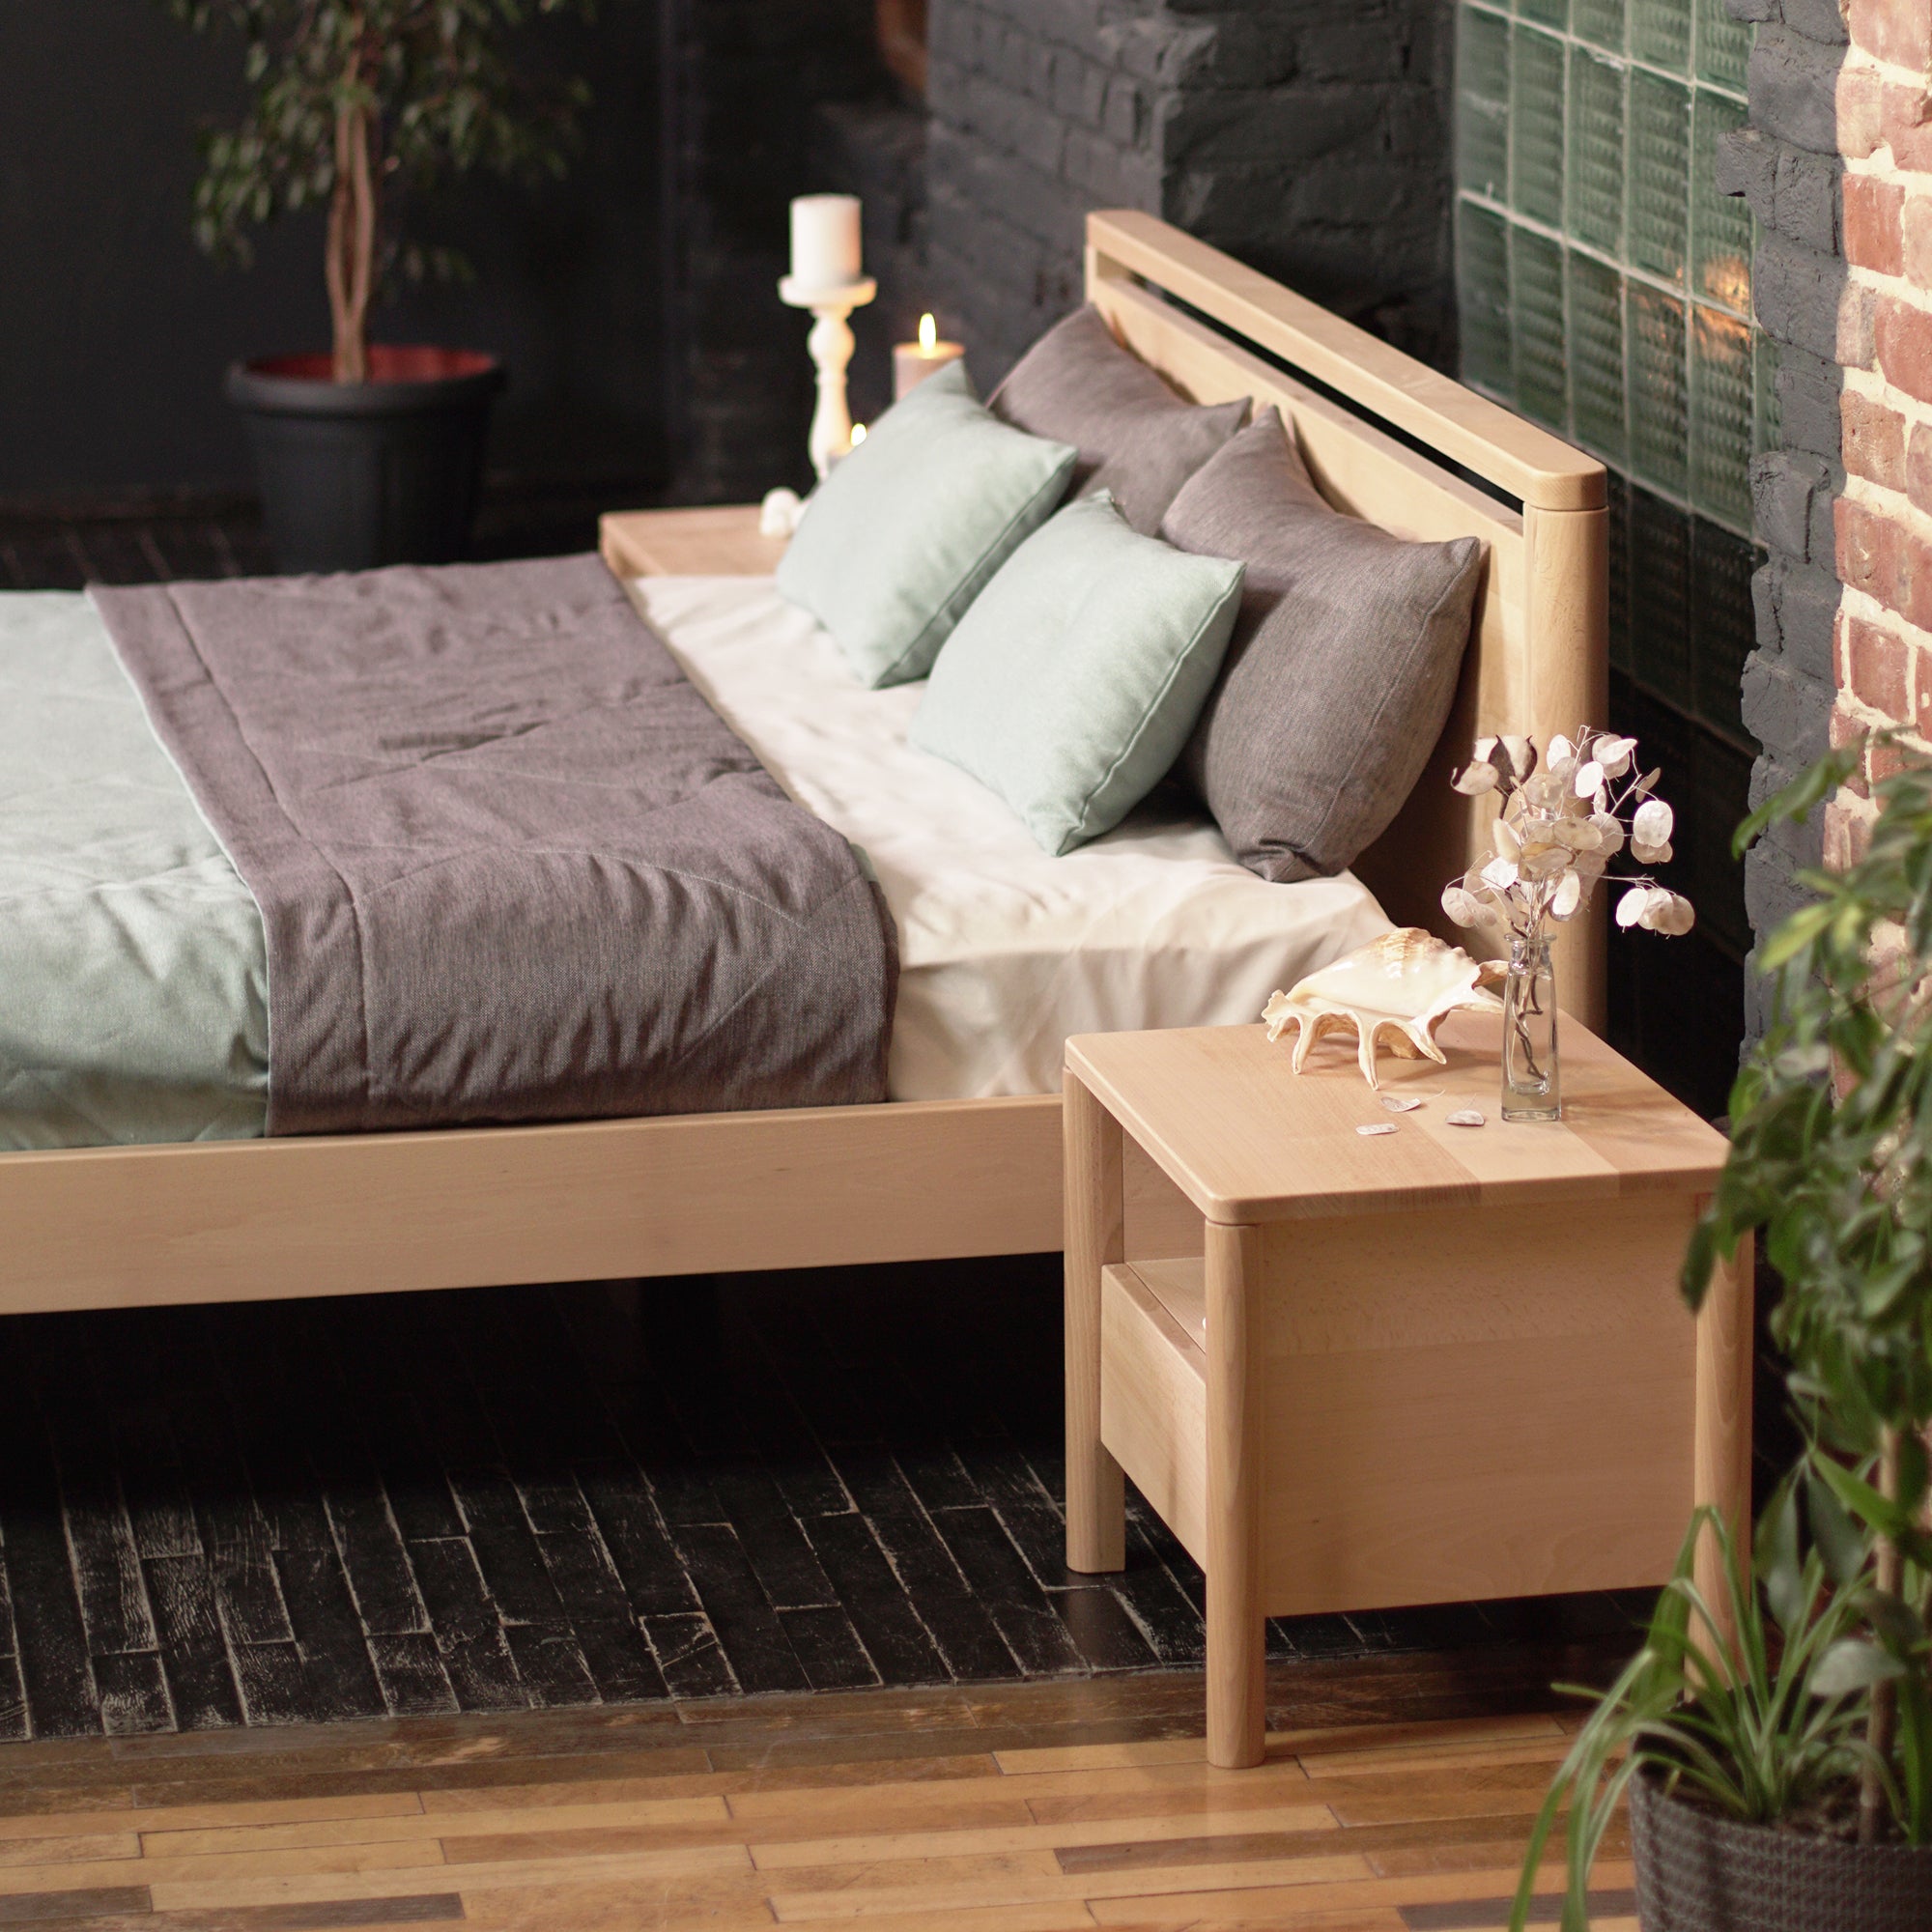 DROP HARD Double Bed, Beech Wood interior side view with bedding